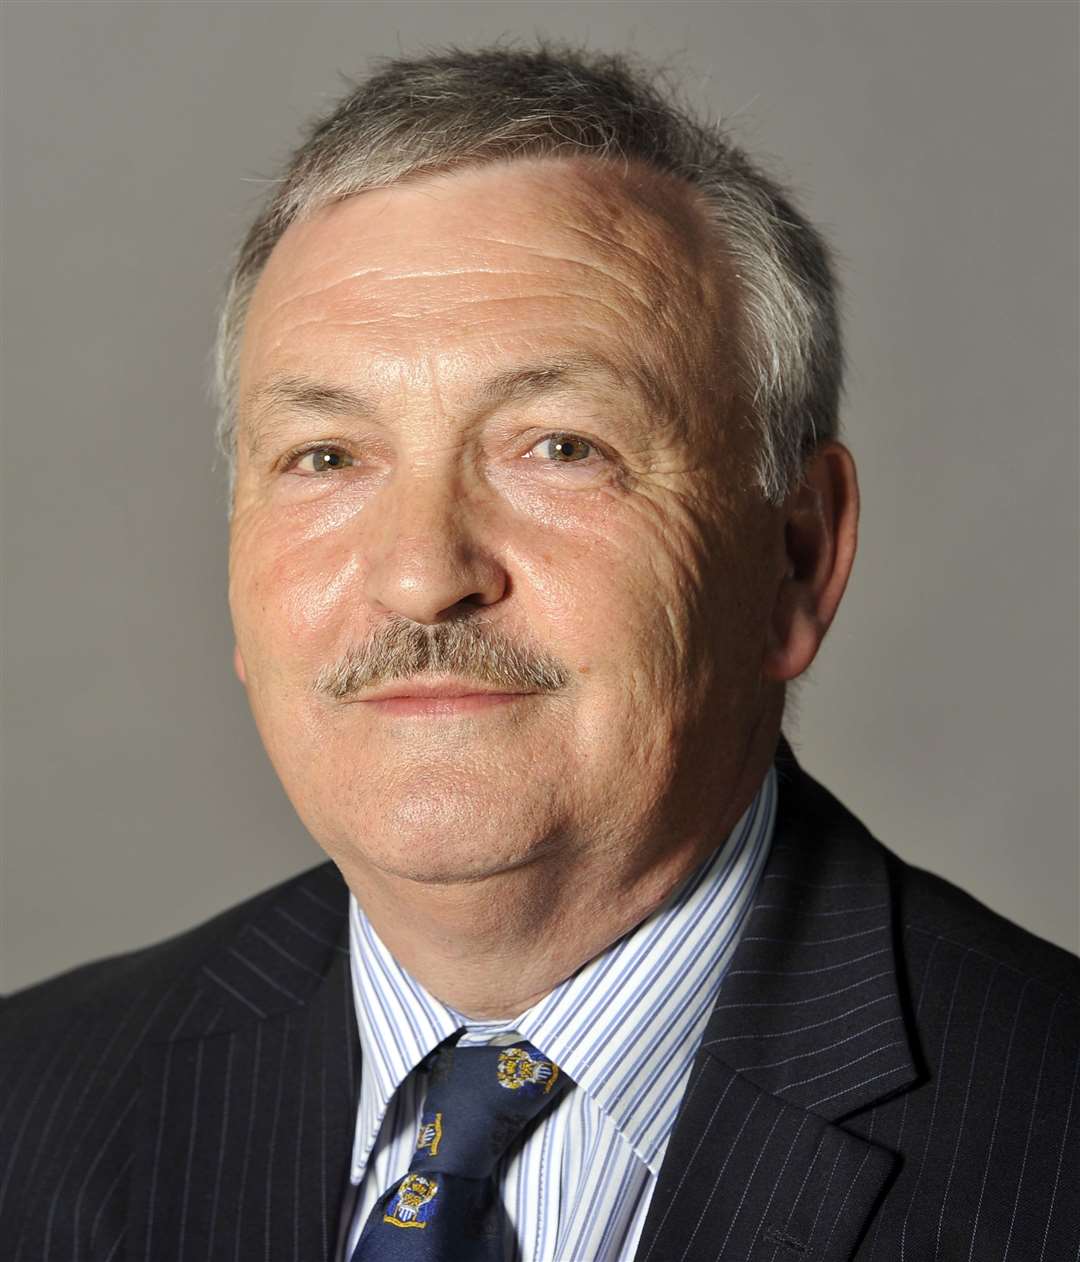 Medway Council leader Alan Jarrett led the praise for the efforts of council staff across the board